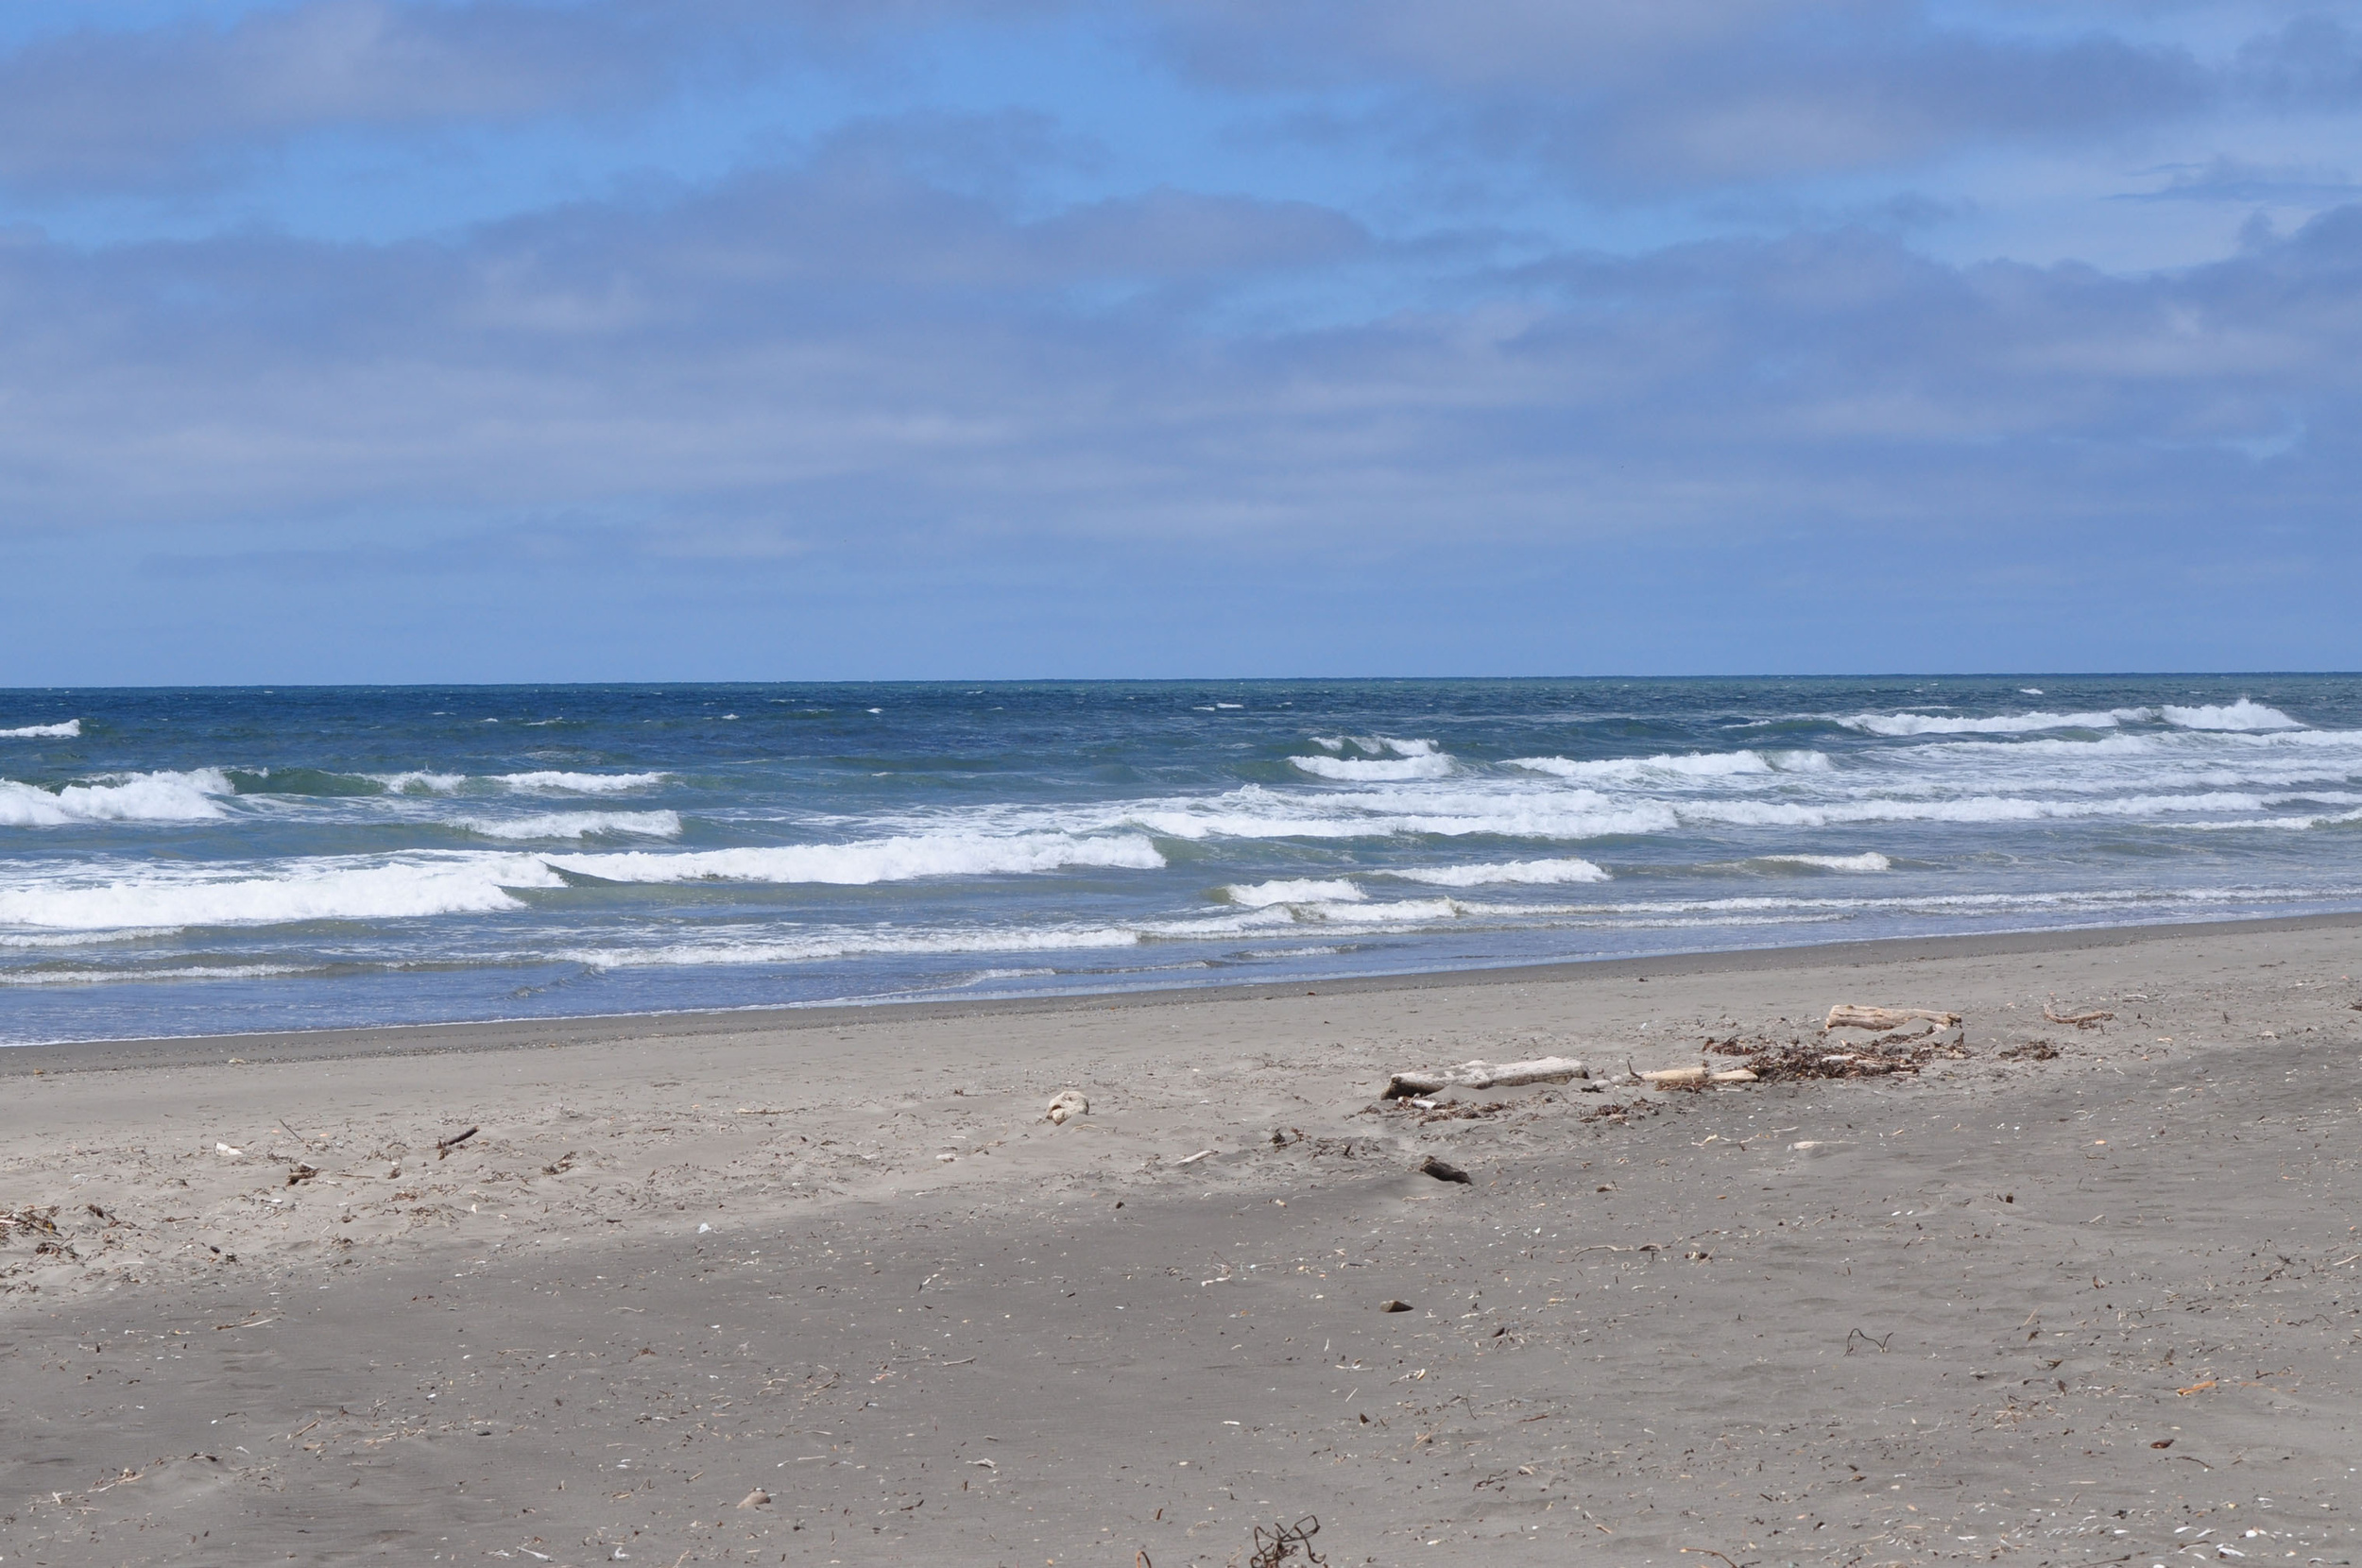 <p>Ocean Shores is the crown jewel of the Washington coast, popular with families, couples, and solo travelers. There are many access points to the beach where you can enjoy sweeping views. You can even drive on the beach here! If wheels aren’t your thing, horseback riding is a popular activity.</p><p><a href='https://www.msn.com/en-us/community/channel/vid-cj9pqbr0vn9in2b6ddcd8sfgpfq6x6utp44fssrv6mc2gtybw0us'>Follow us on MSN to see more of our exclusive lifestyle content.</a></p>